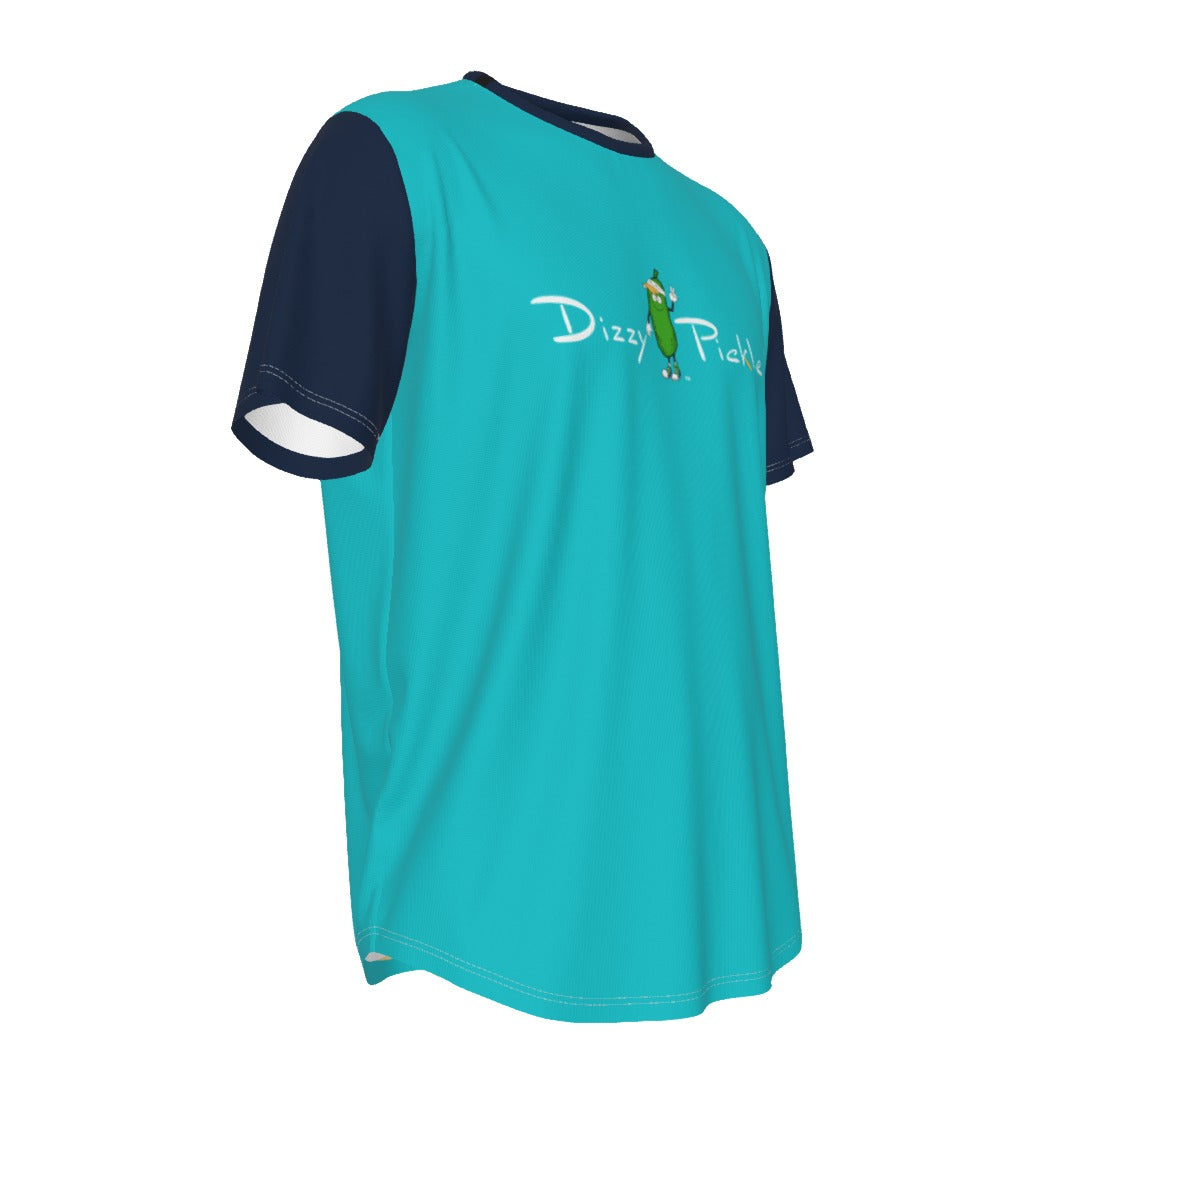 DZY P Classic - Teal/Navy - Men's Short Sleeve Rounded Hem by Dizzy Pickle